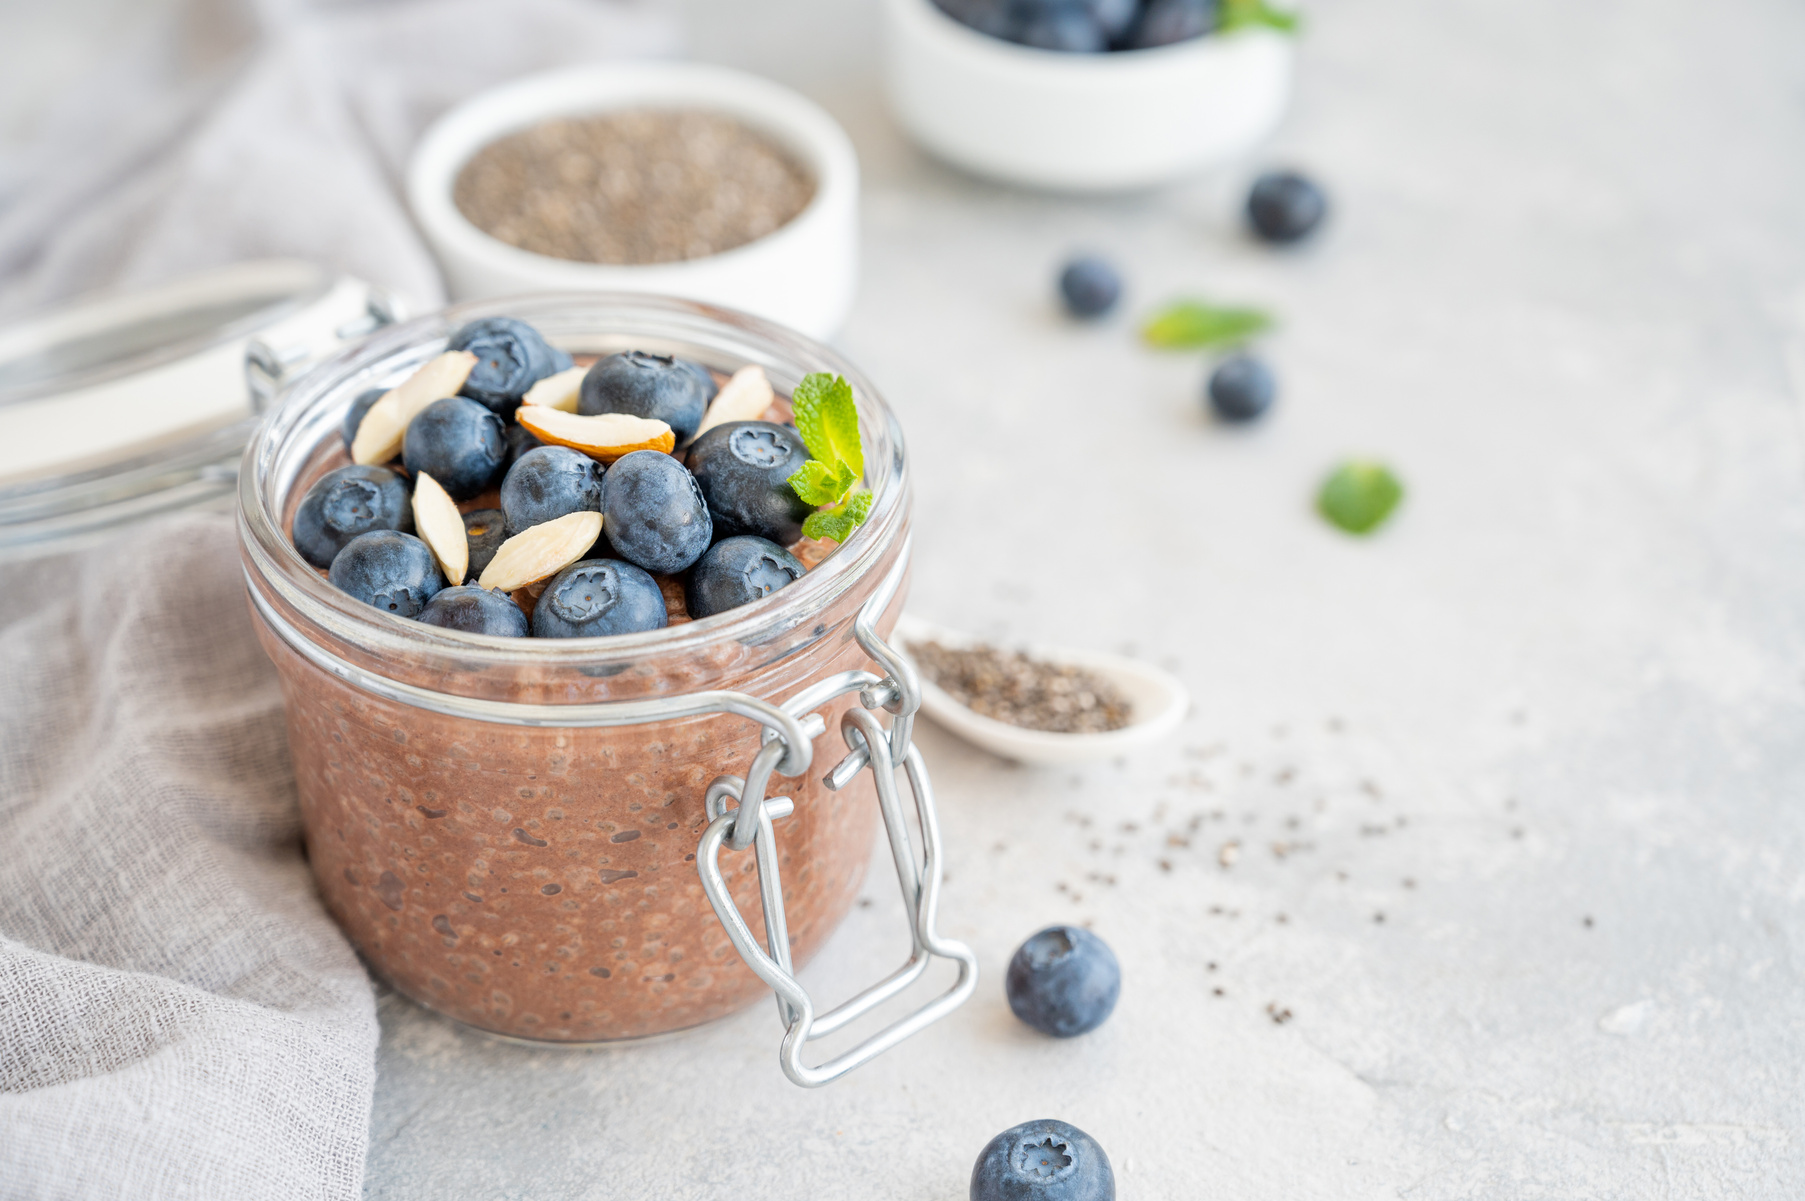 Chocolate Chia Pudding with Blueberry and Almonds